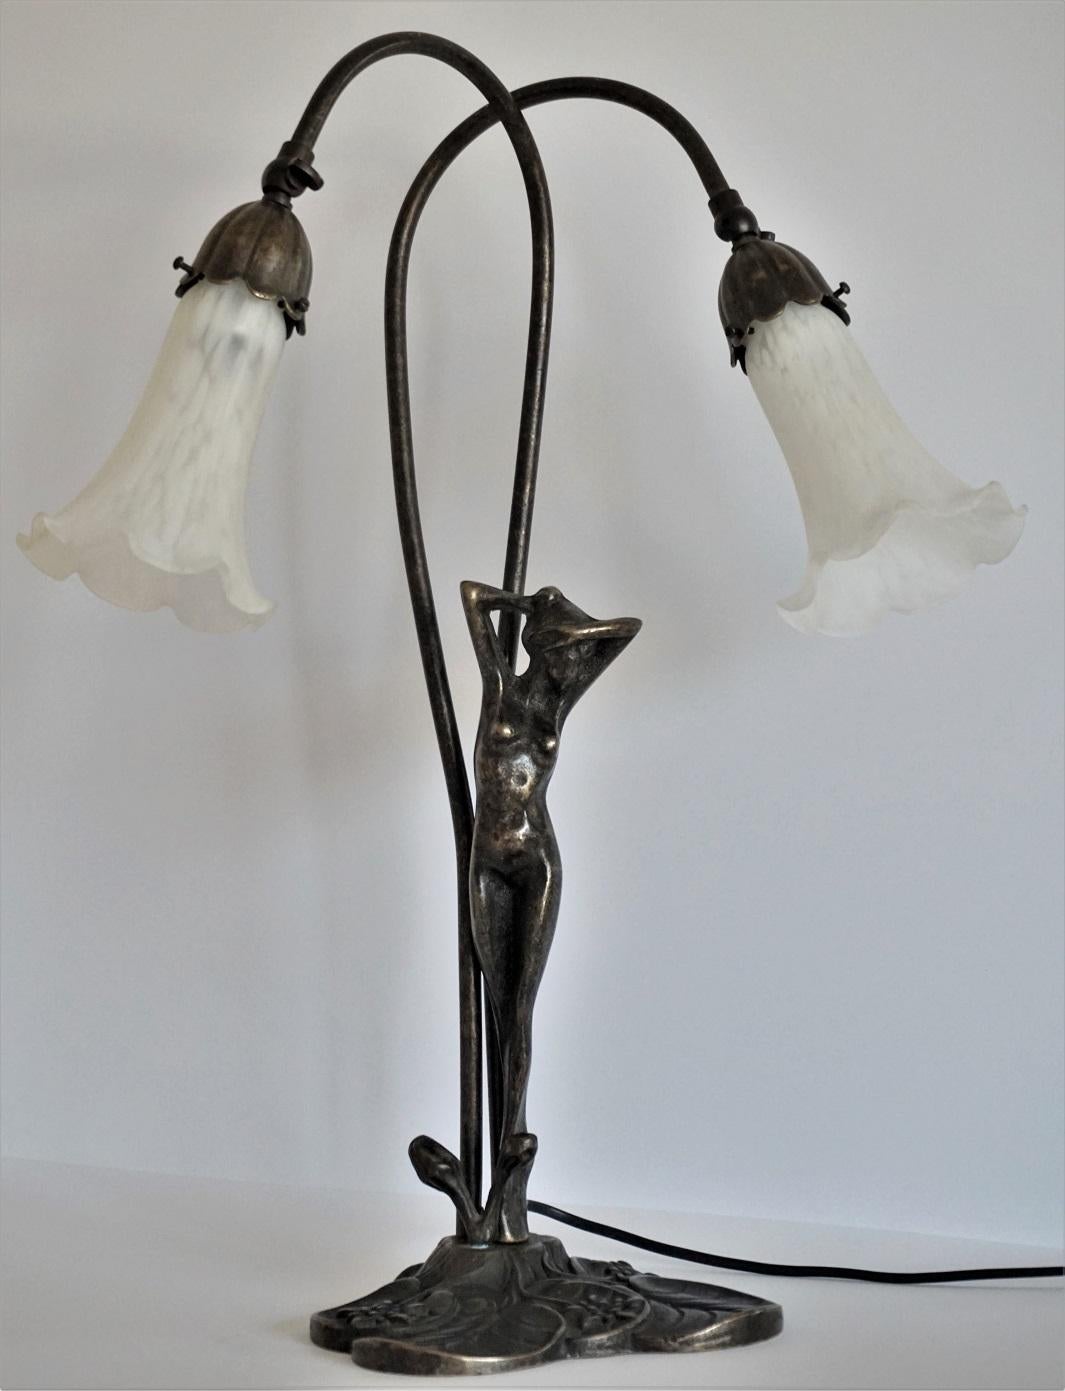 Cast French Art Deco Bronze Figurine Articulated Double Arm Table Lamp For Sale